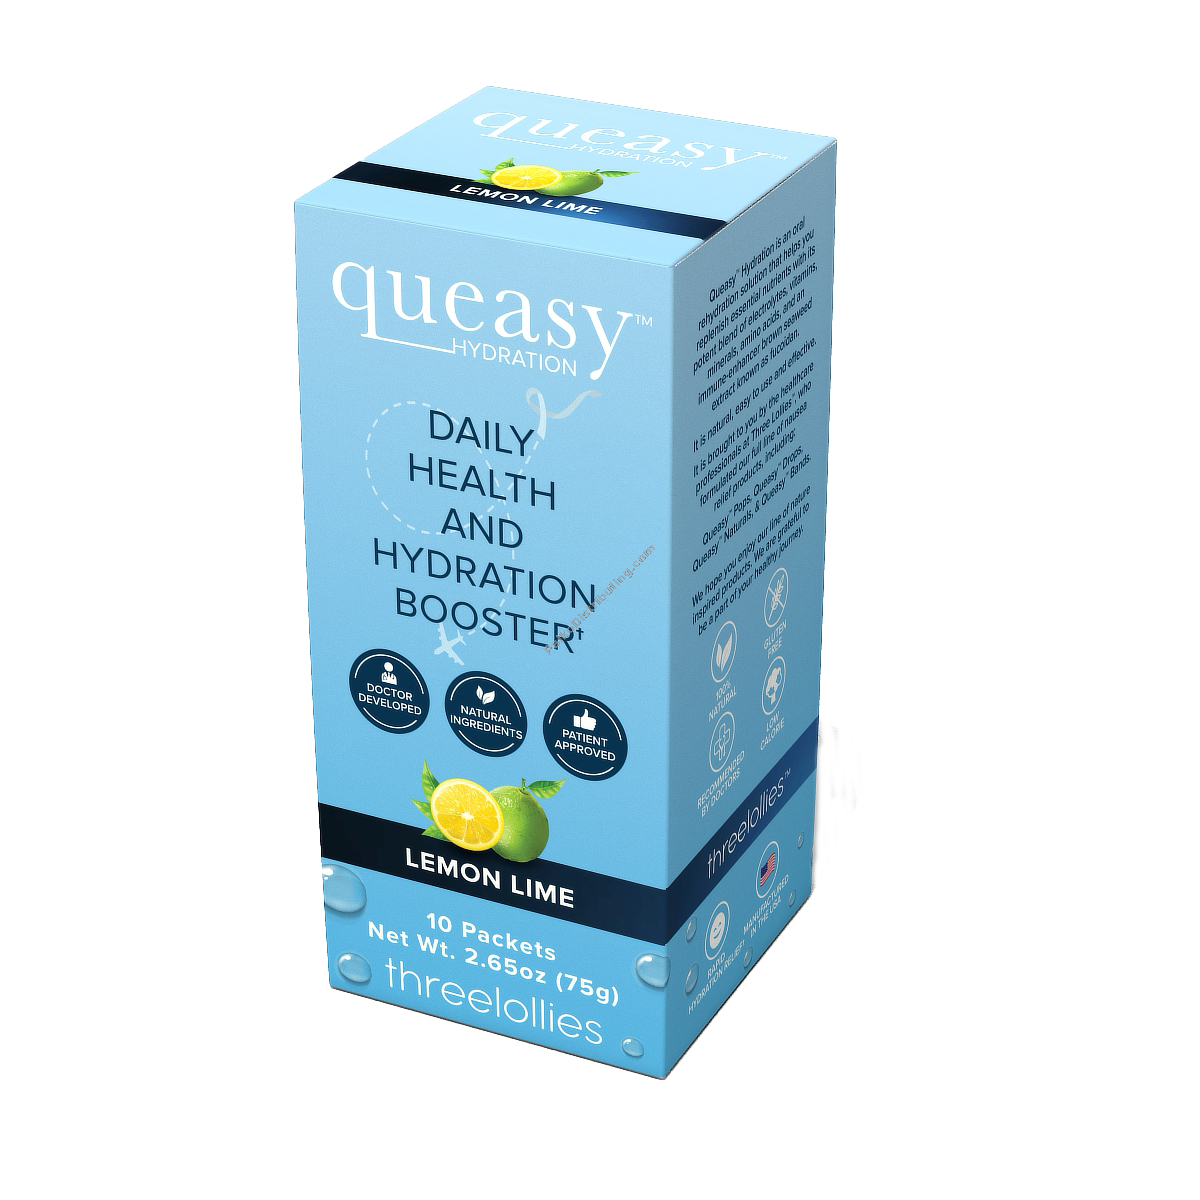 Product Image: Queasy Hydration Booster Lemon Lime